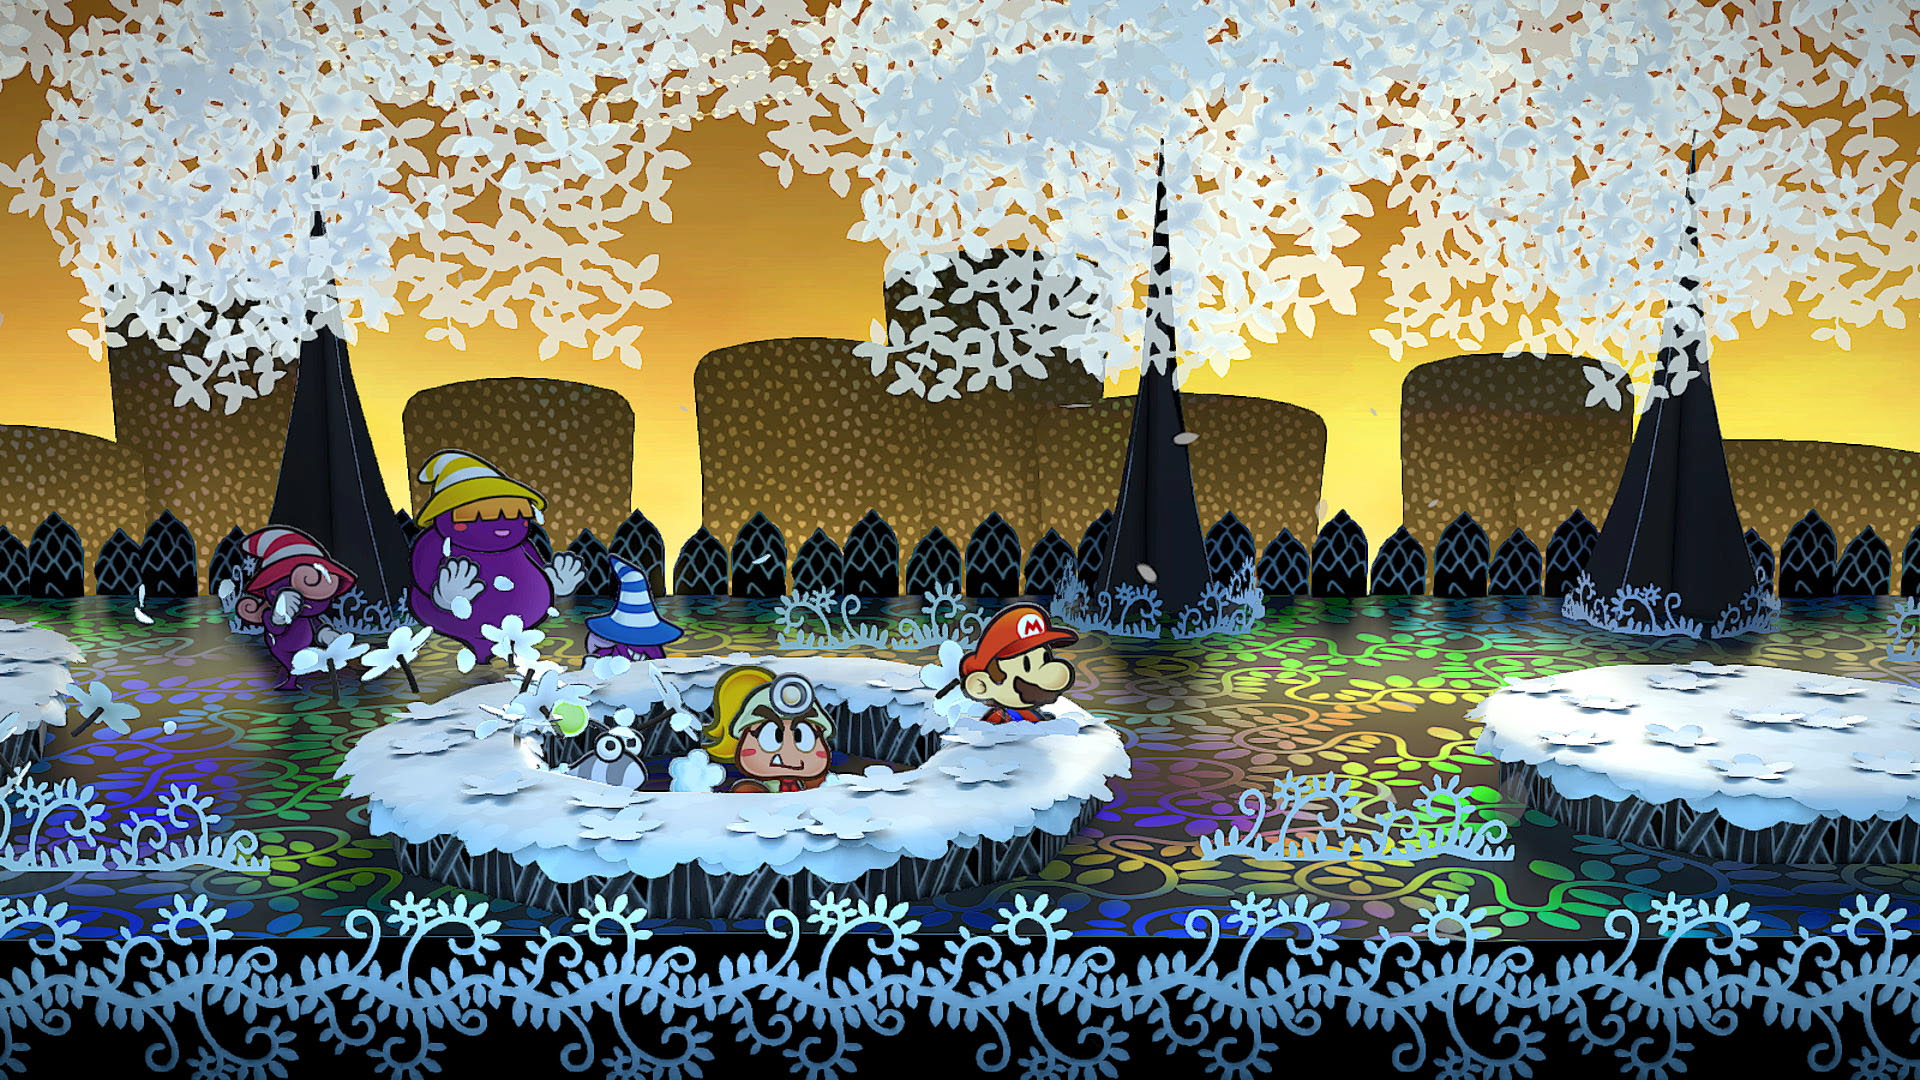 Paper Mario: The Thousand-Year Door remake's new Toad could mean